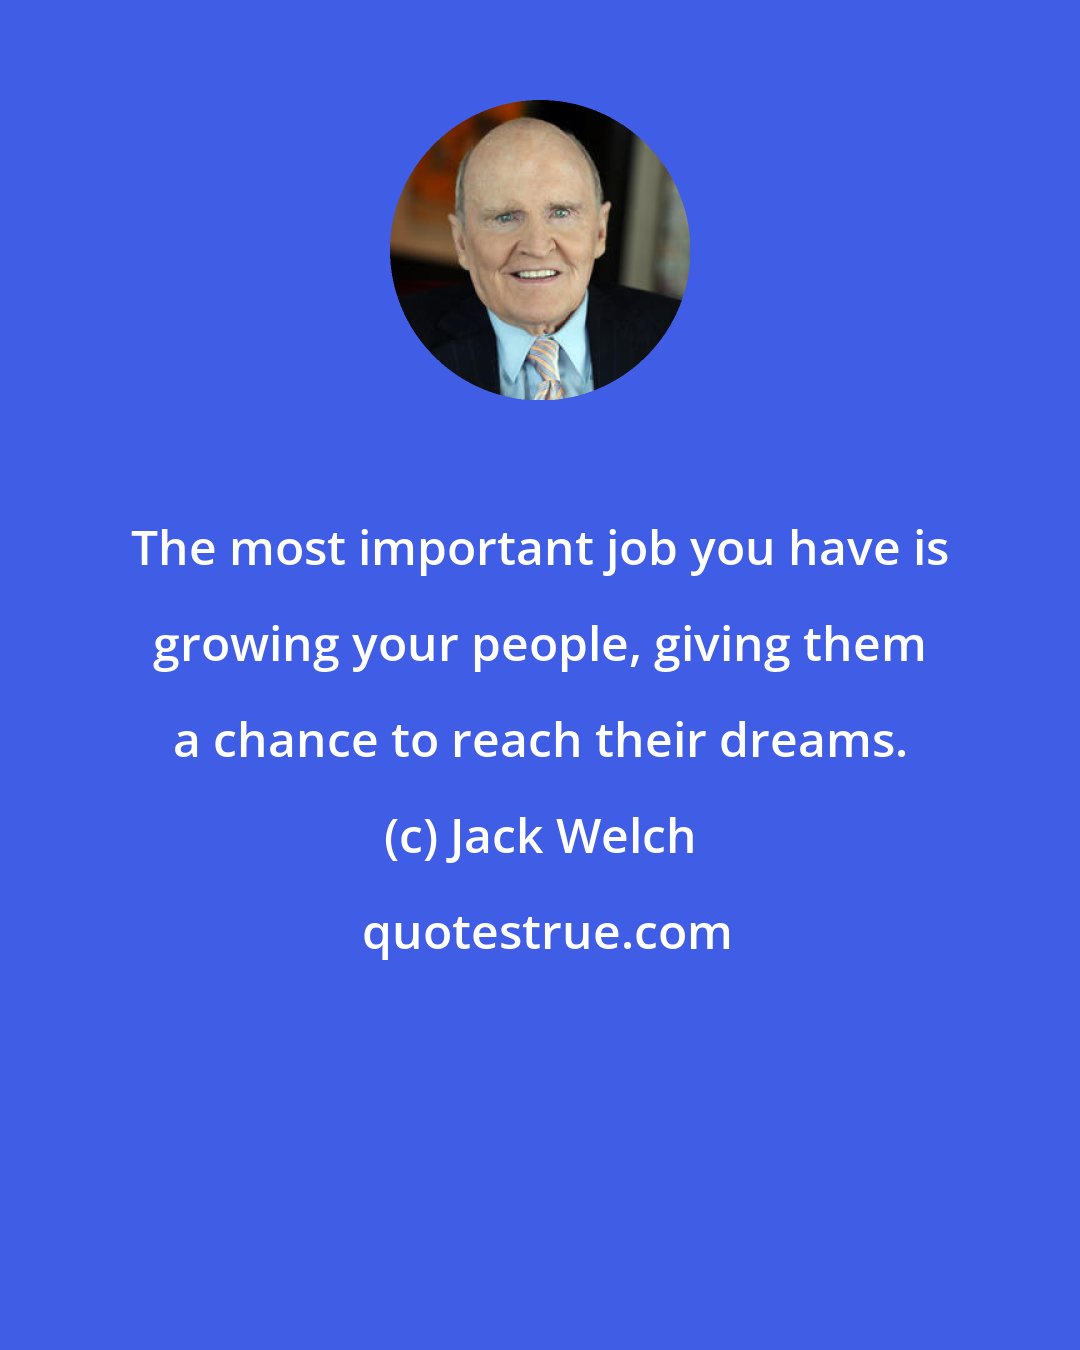 Jack Welch: The most important job you have is growing your people, giving them a chance to reach their dreams.